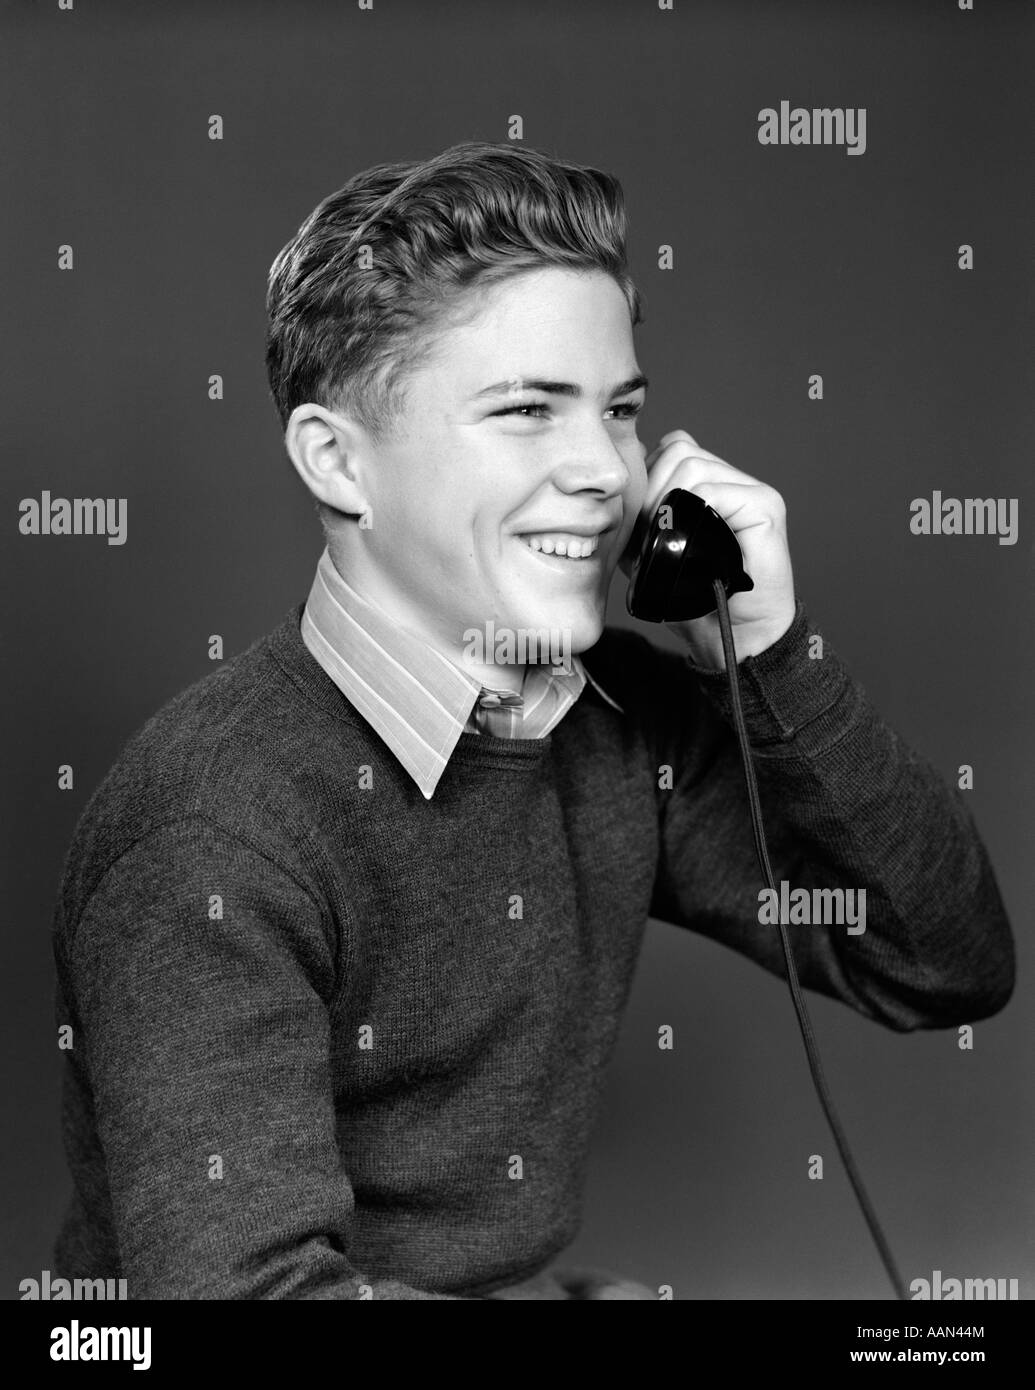 1940s YOUNG BOY TALKING ON TELEPHONE SMILING Stock Photo